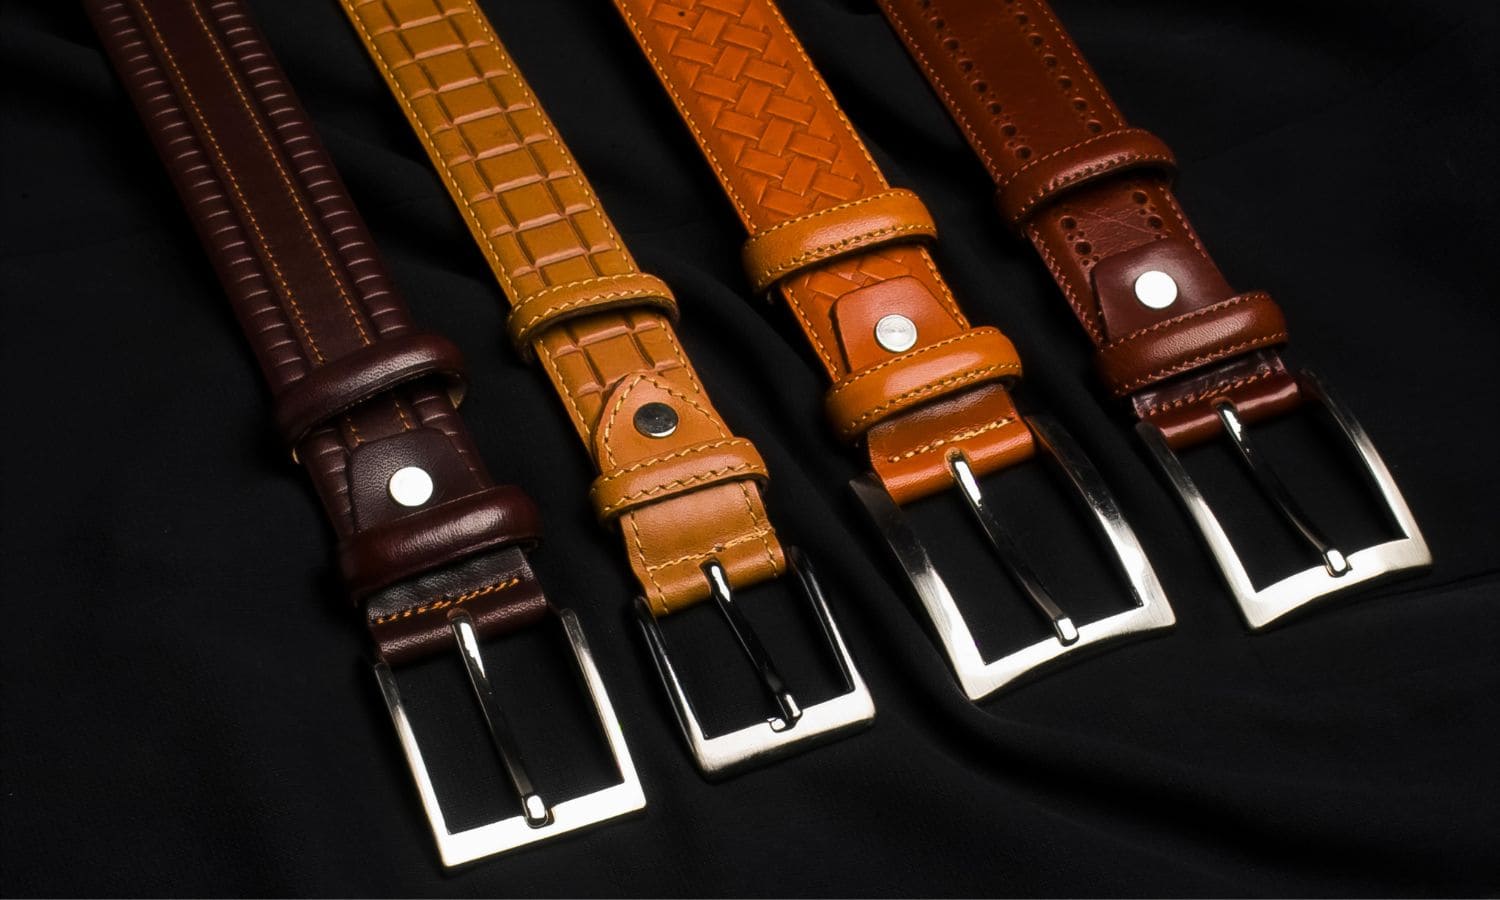 Fine Leather Men's Dress Belt Handcrafted from Bridle Leather